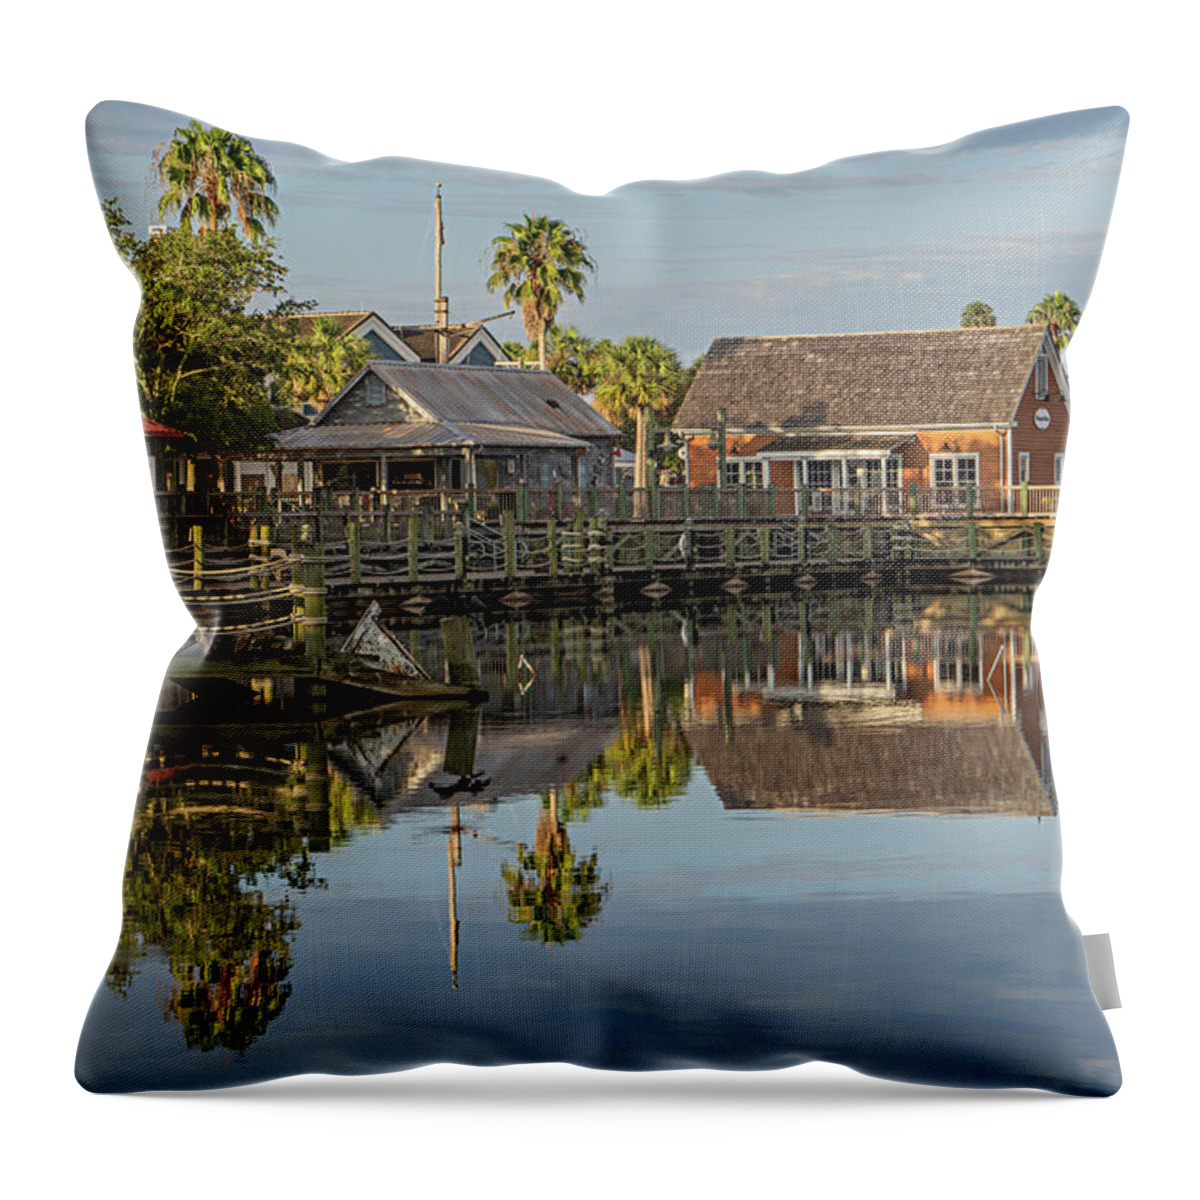 The Villages Throw Pillow featuring the photograph The Villages by Dennis Dugan